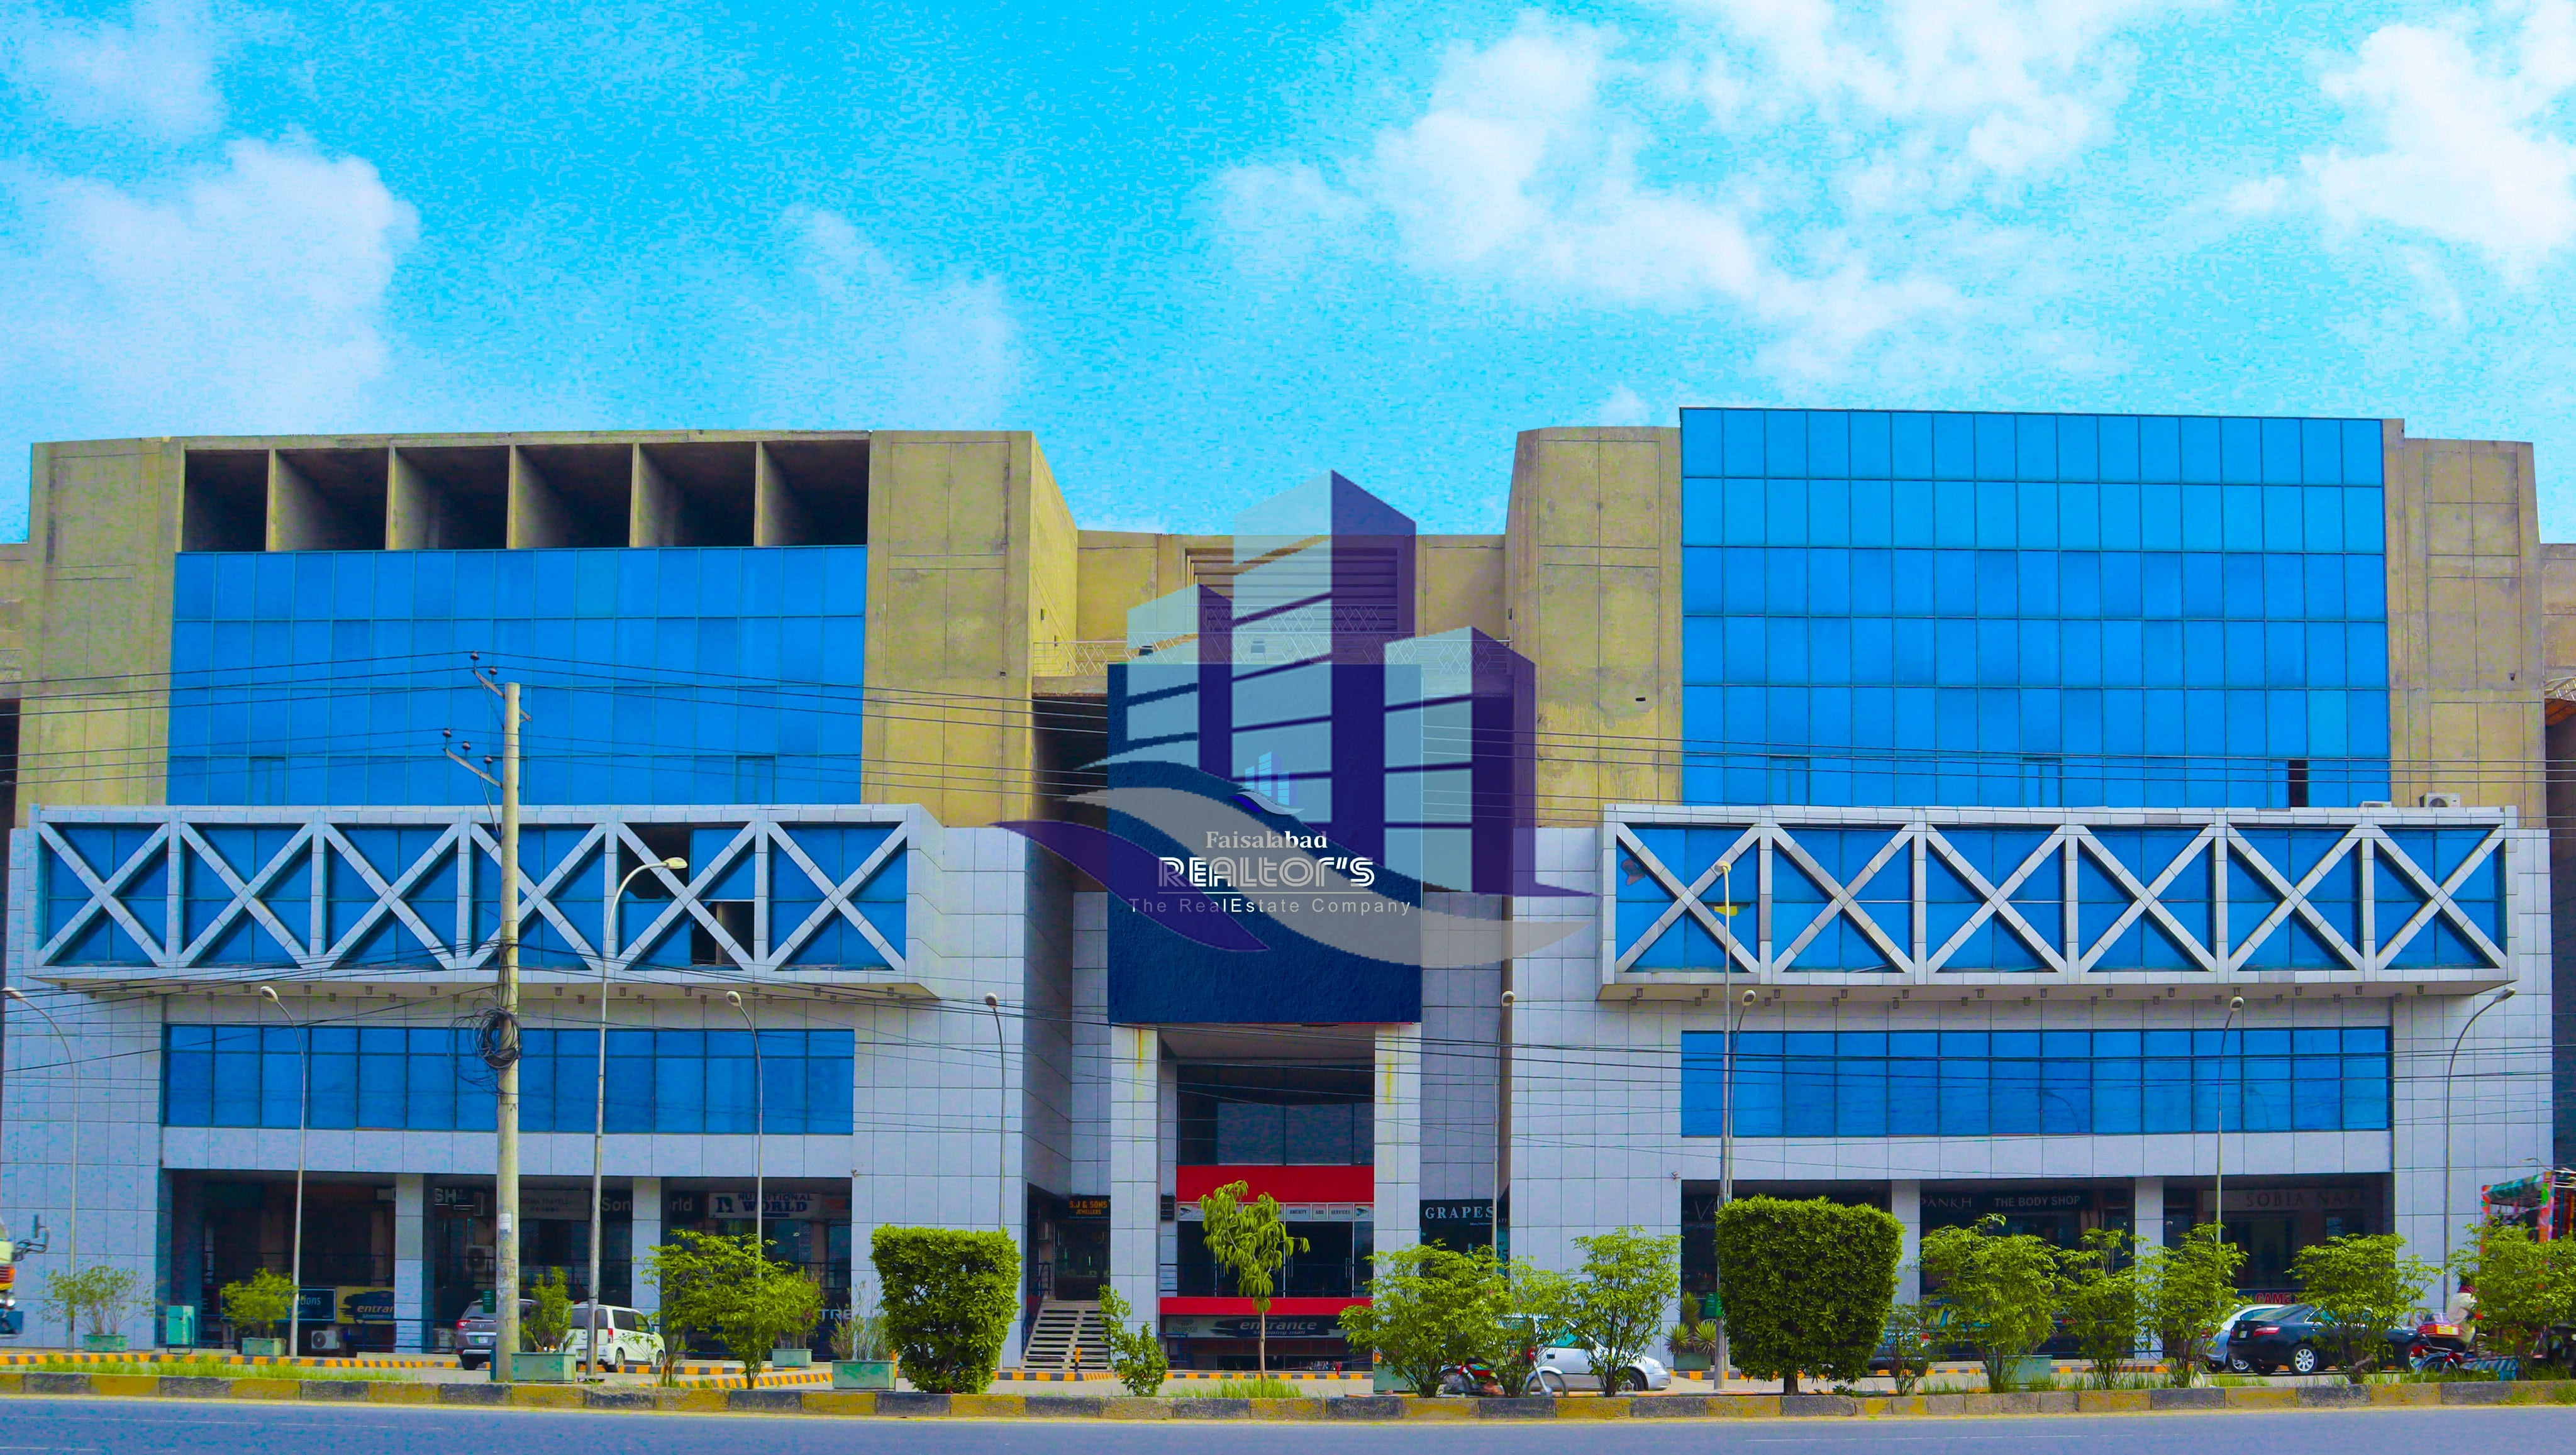 336 Sq.Ft Shop Available For Sale At Kohinoor  Plaza Faisalabad